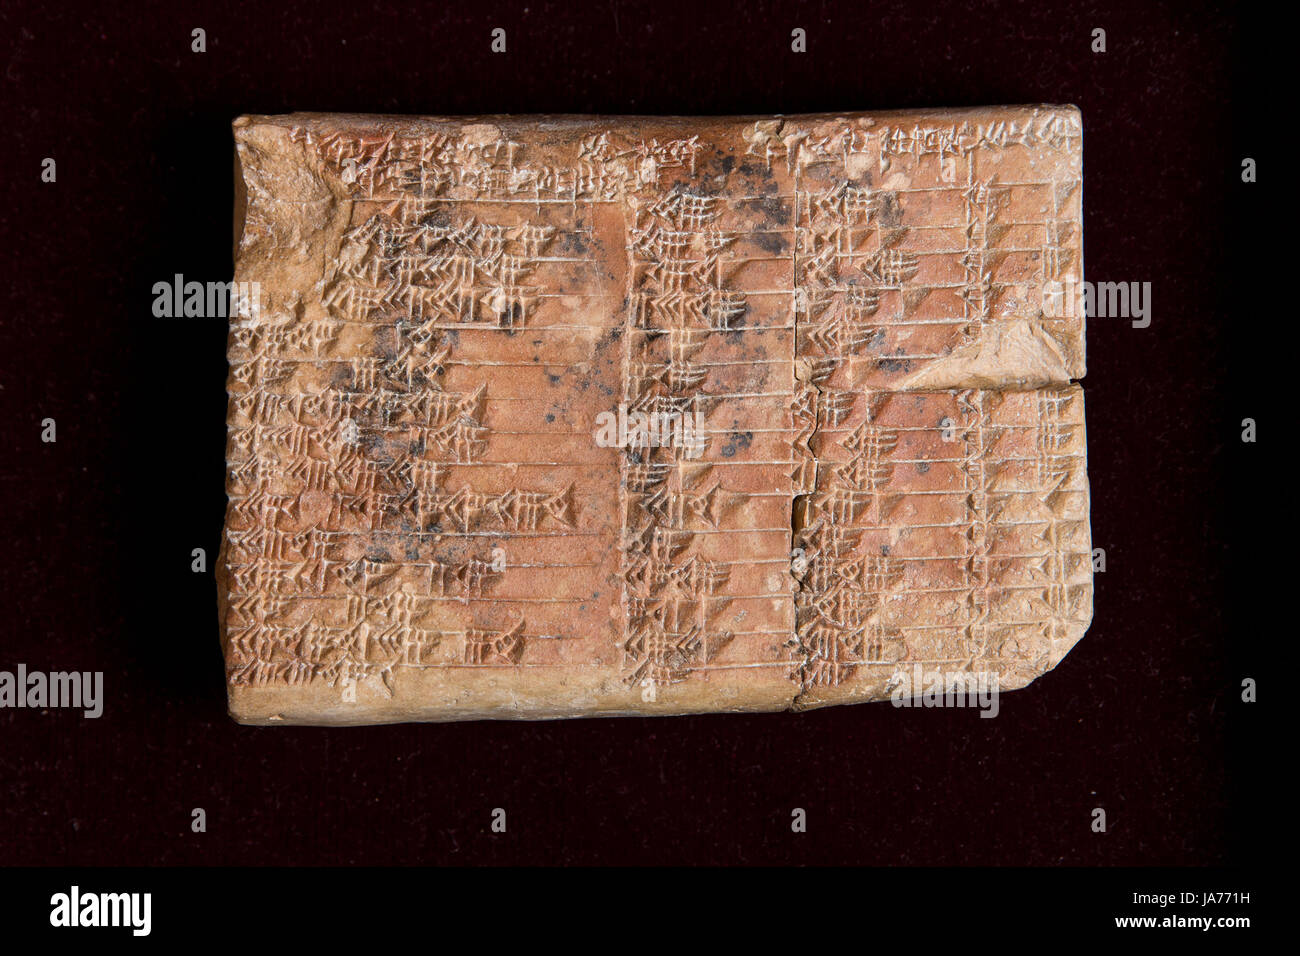 (170825) -- SYDENY, Aug. 25, 2017 (Xinhua) -- Photo taken on April 17, 2017 shows the Babylonian clay tablet in New York, the United States. The mystery of a famous 3,700-year-old Babylonian clay tablet, once owned by the real 'Indiana Jones,' has been unlocked by Australian mathematician Daniel Mansfield. It was revealed on Aug. 25, 2017. (Xinhua/University of New South Wales) (dtf) Stock Photo